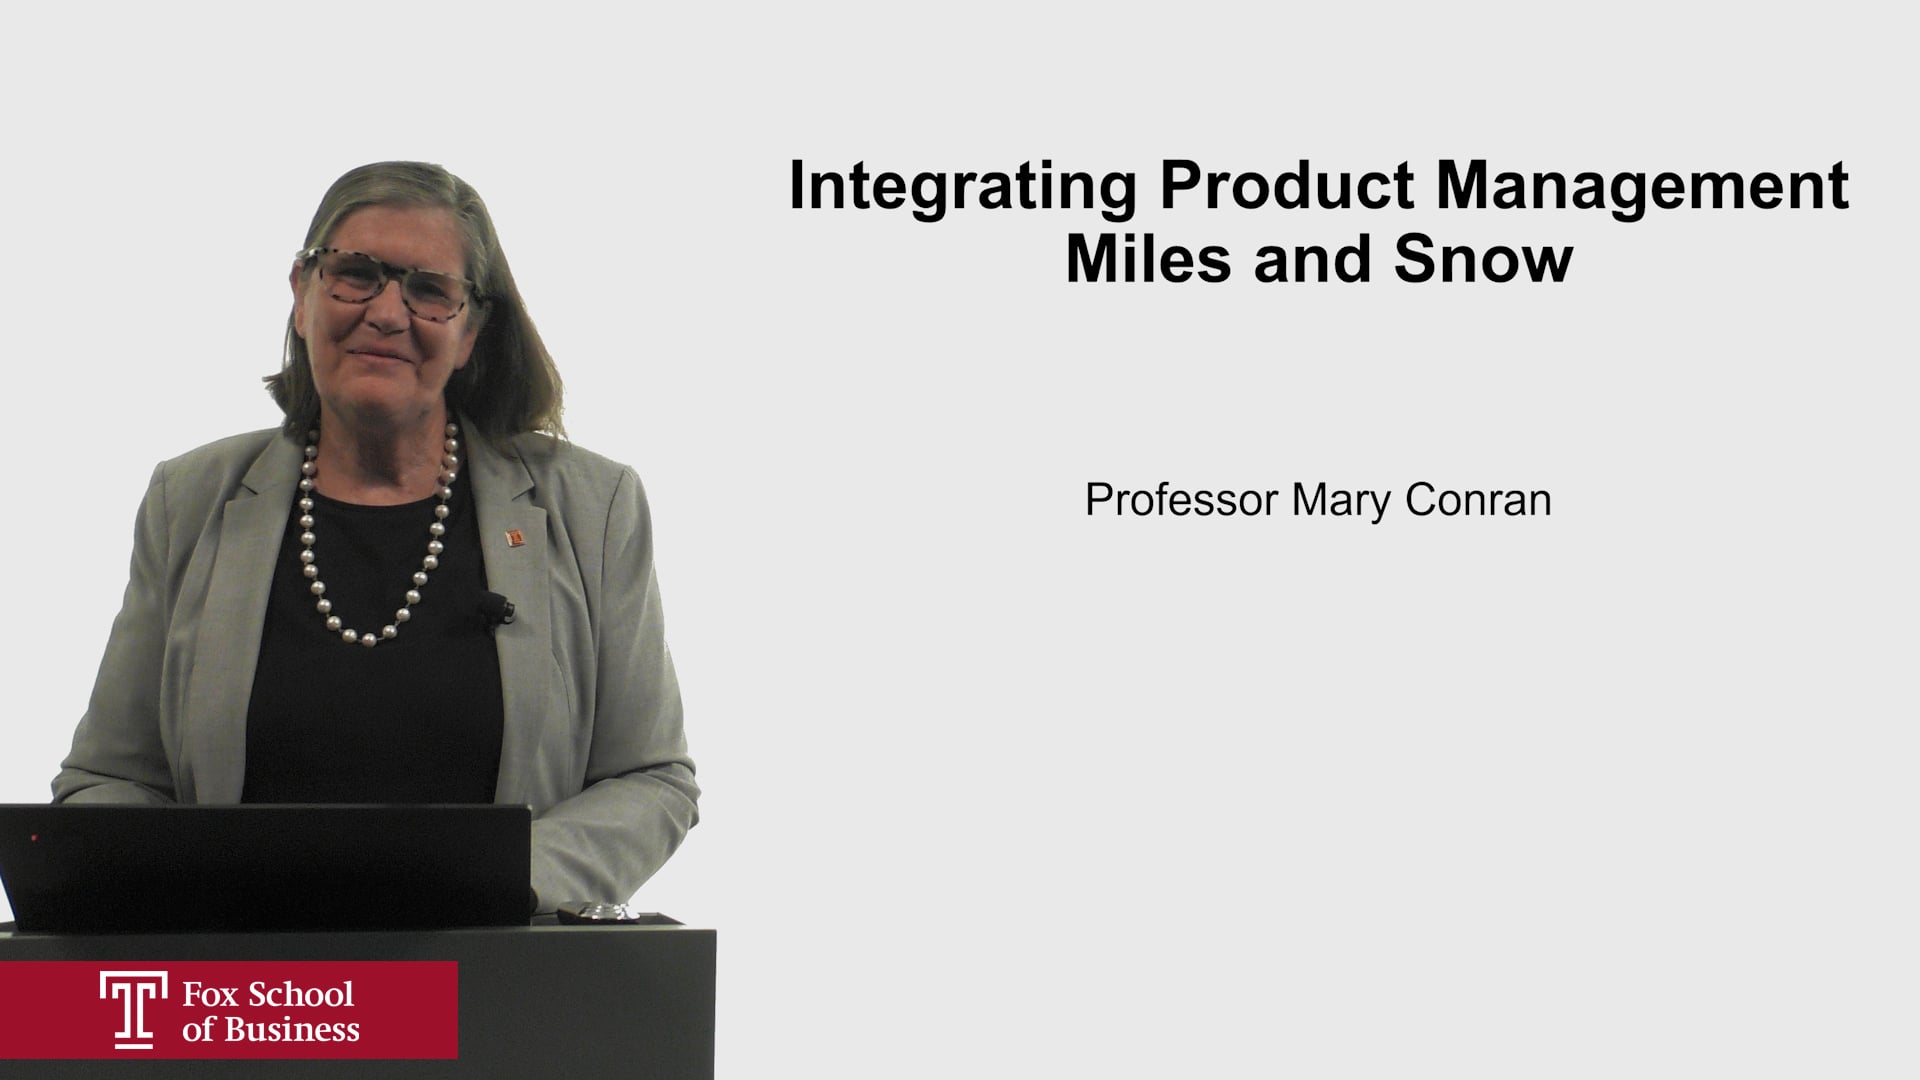 Integrating Product Management Miles and Snow